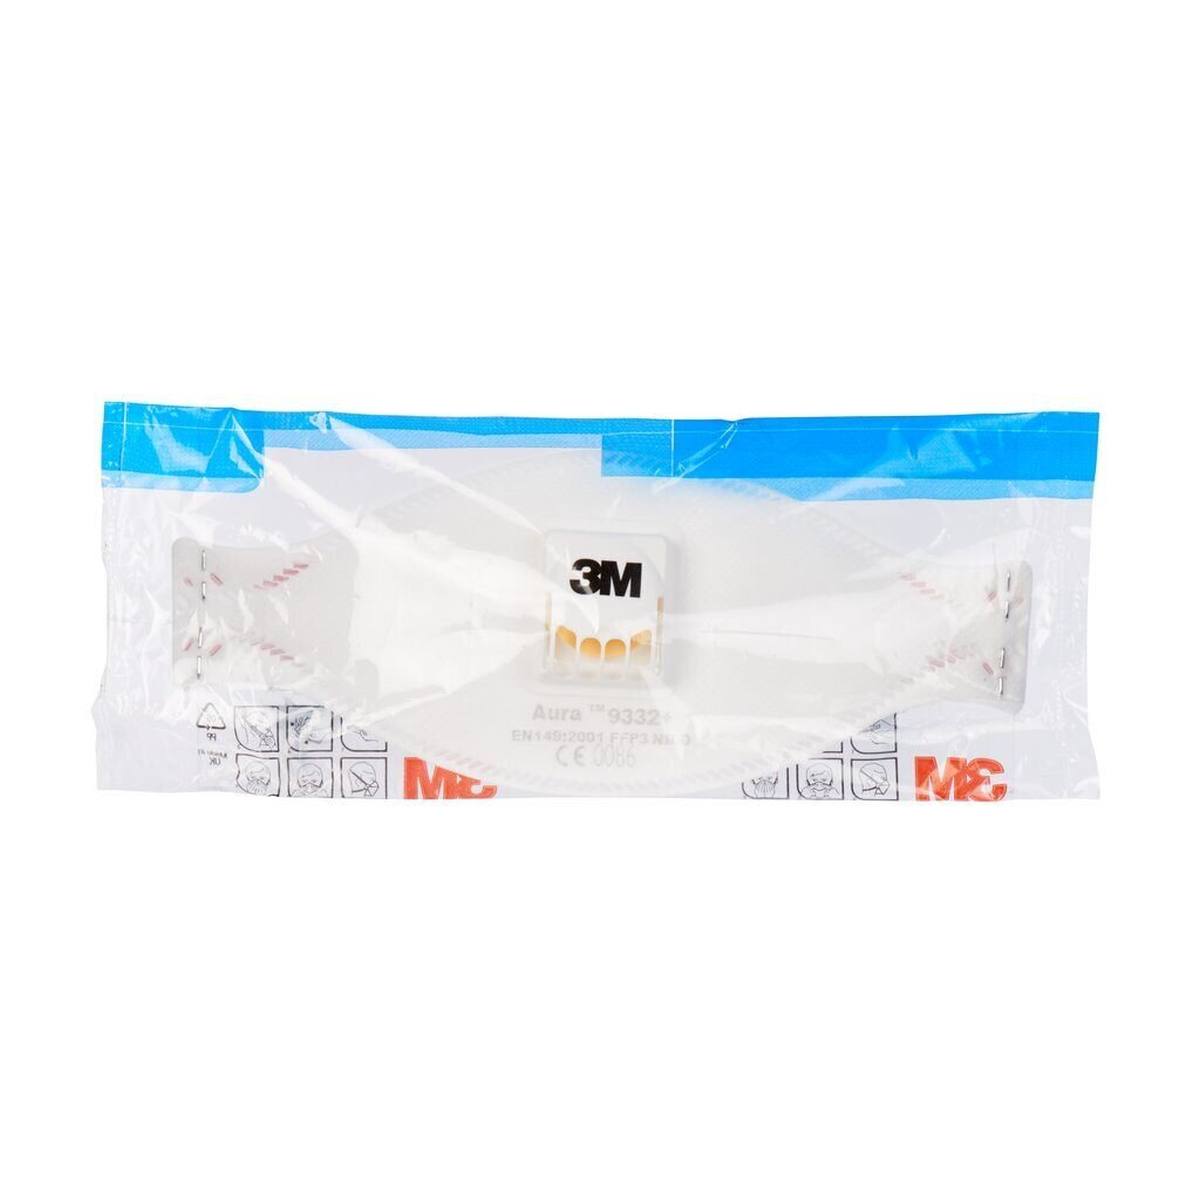 3M 9332 Aura respirator FFP3 with cool-flow exhalation valve, up to 30 times the limit value (hygienically individually packaged)